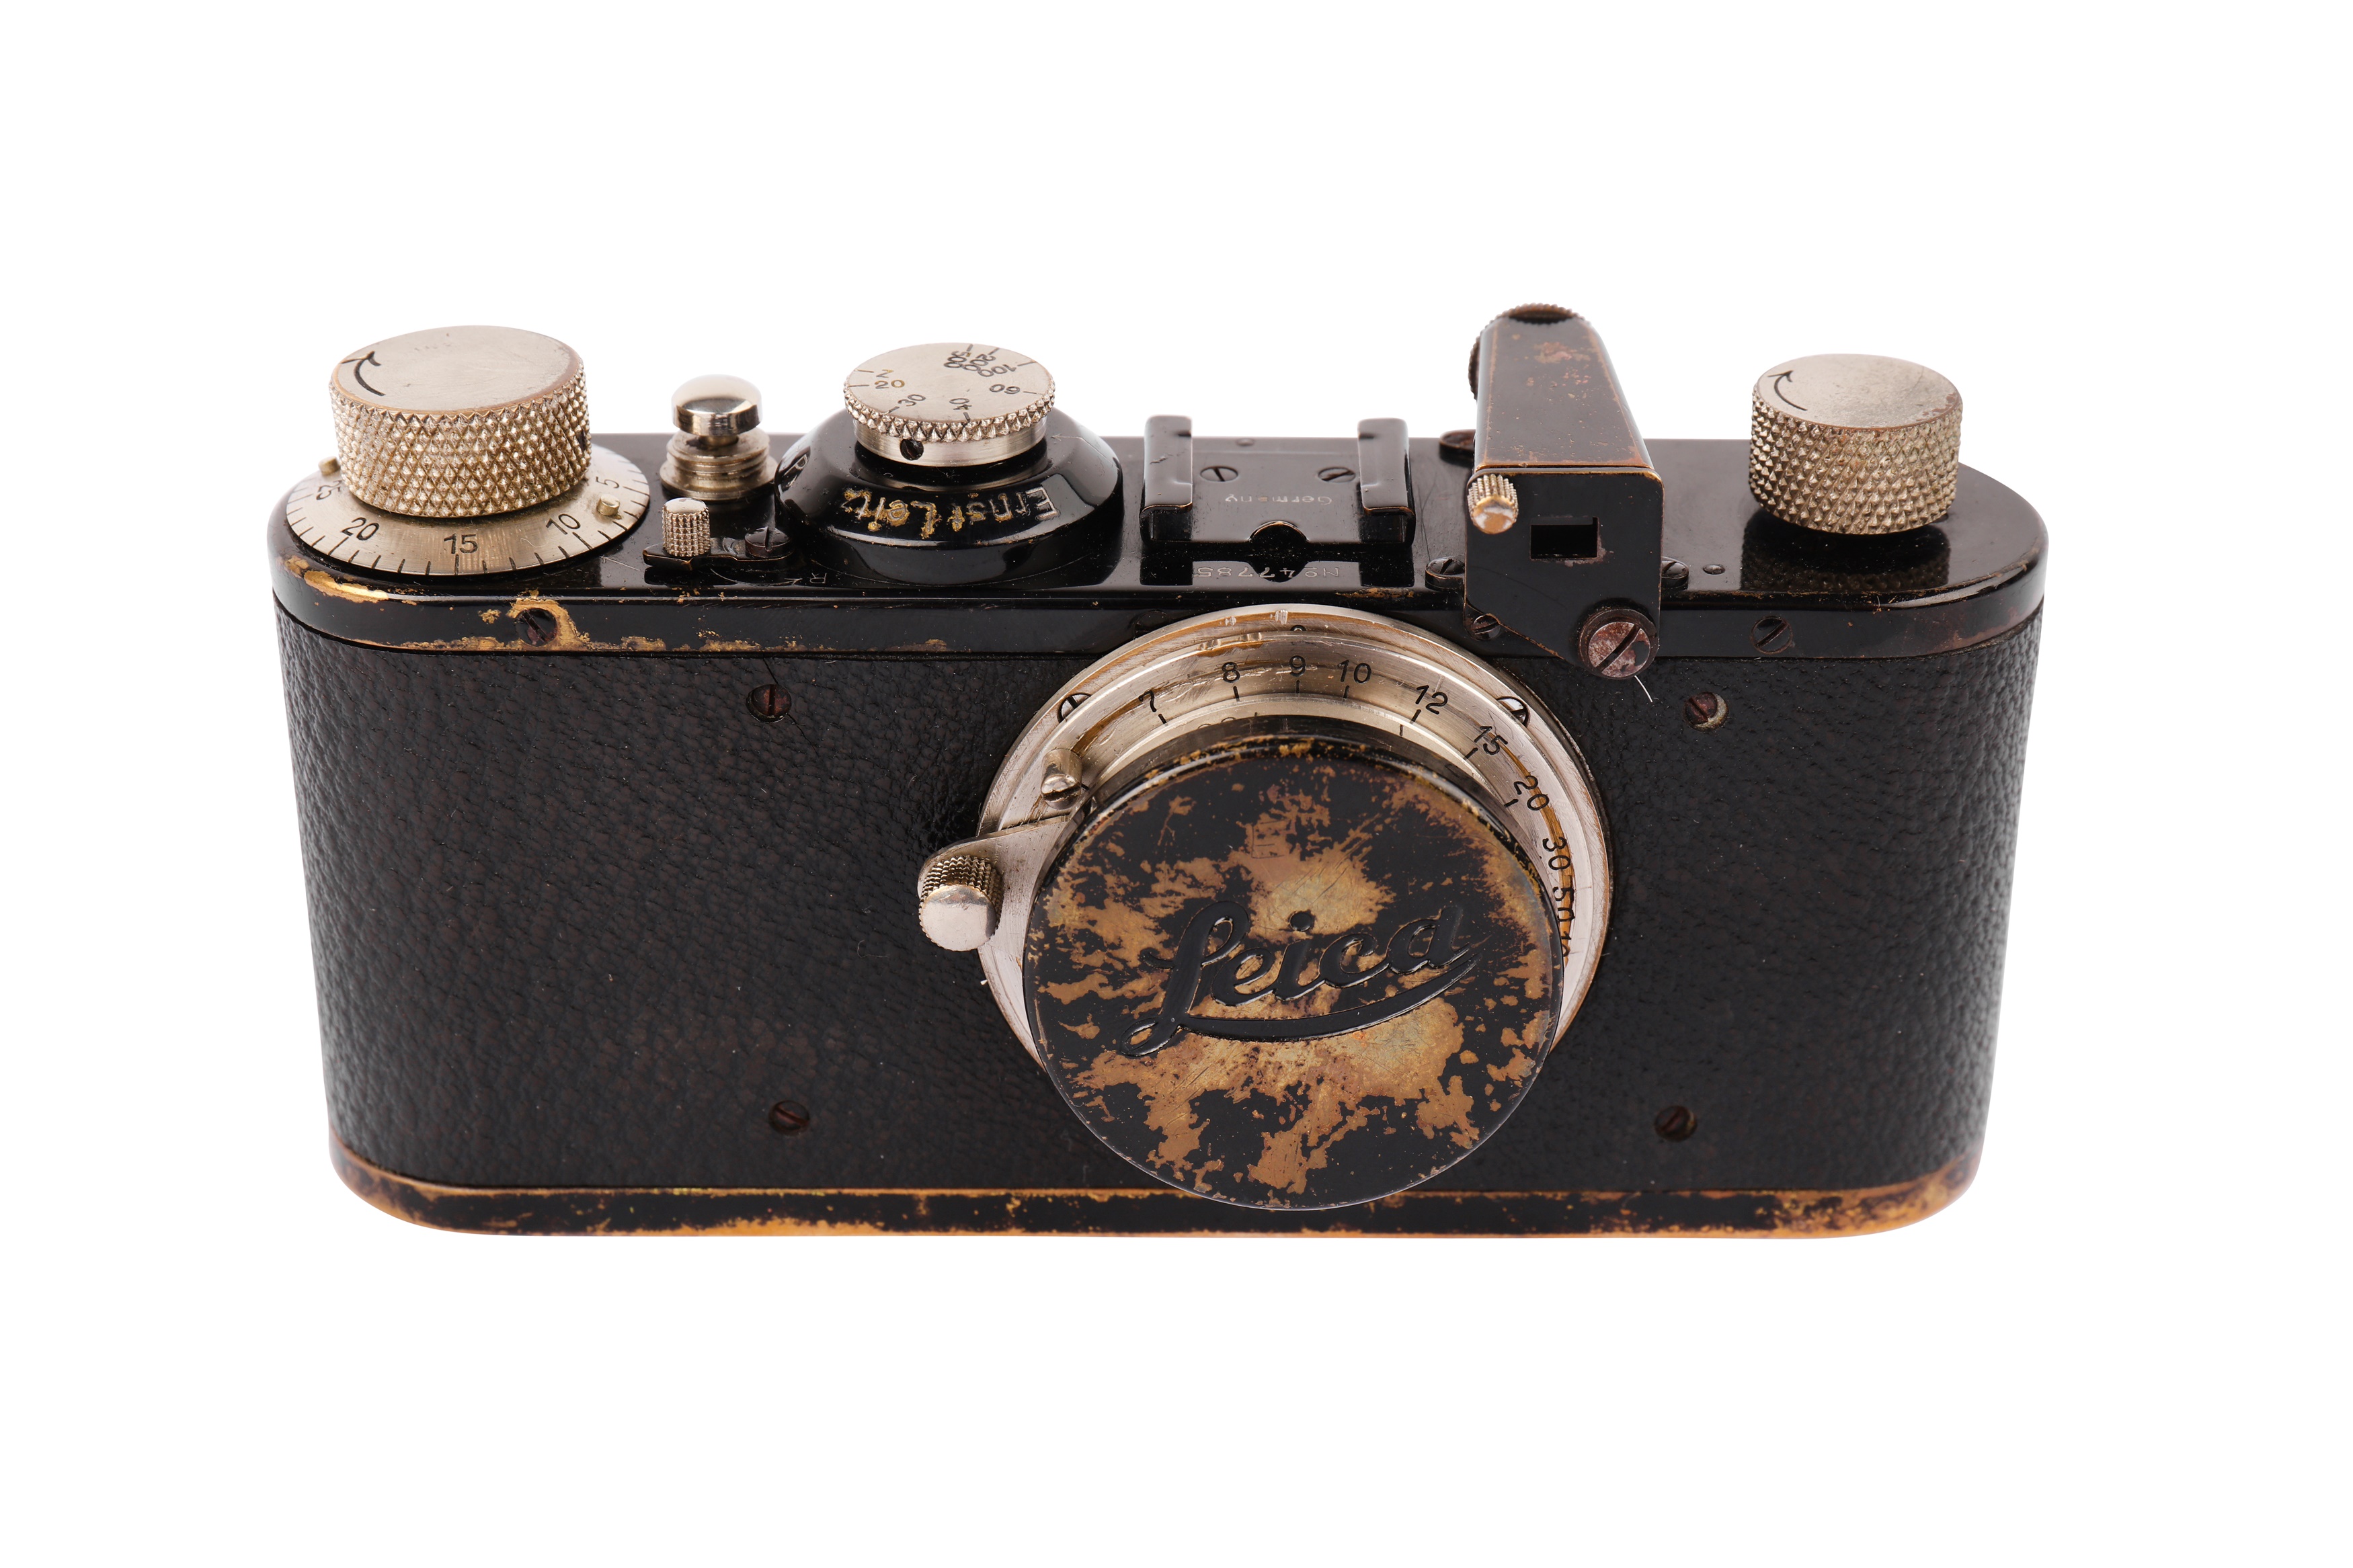 A Rare Leica Ic Non Standard Outfit - Image 25 of 25